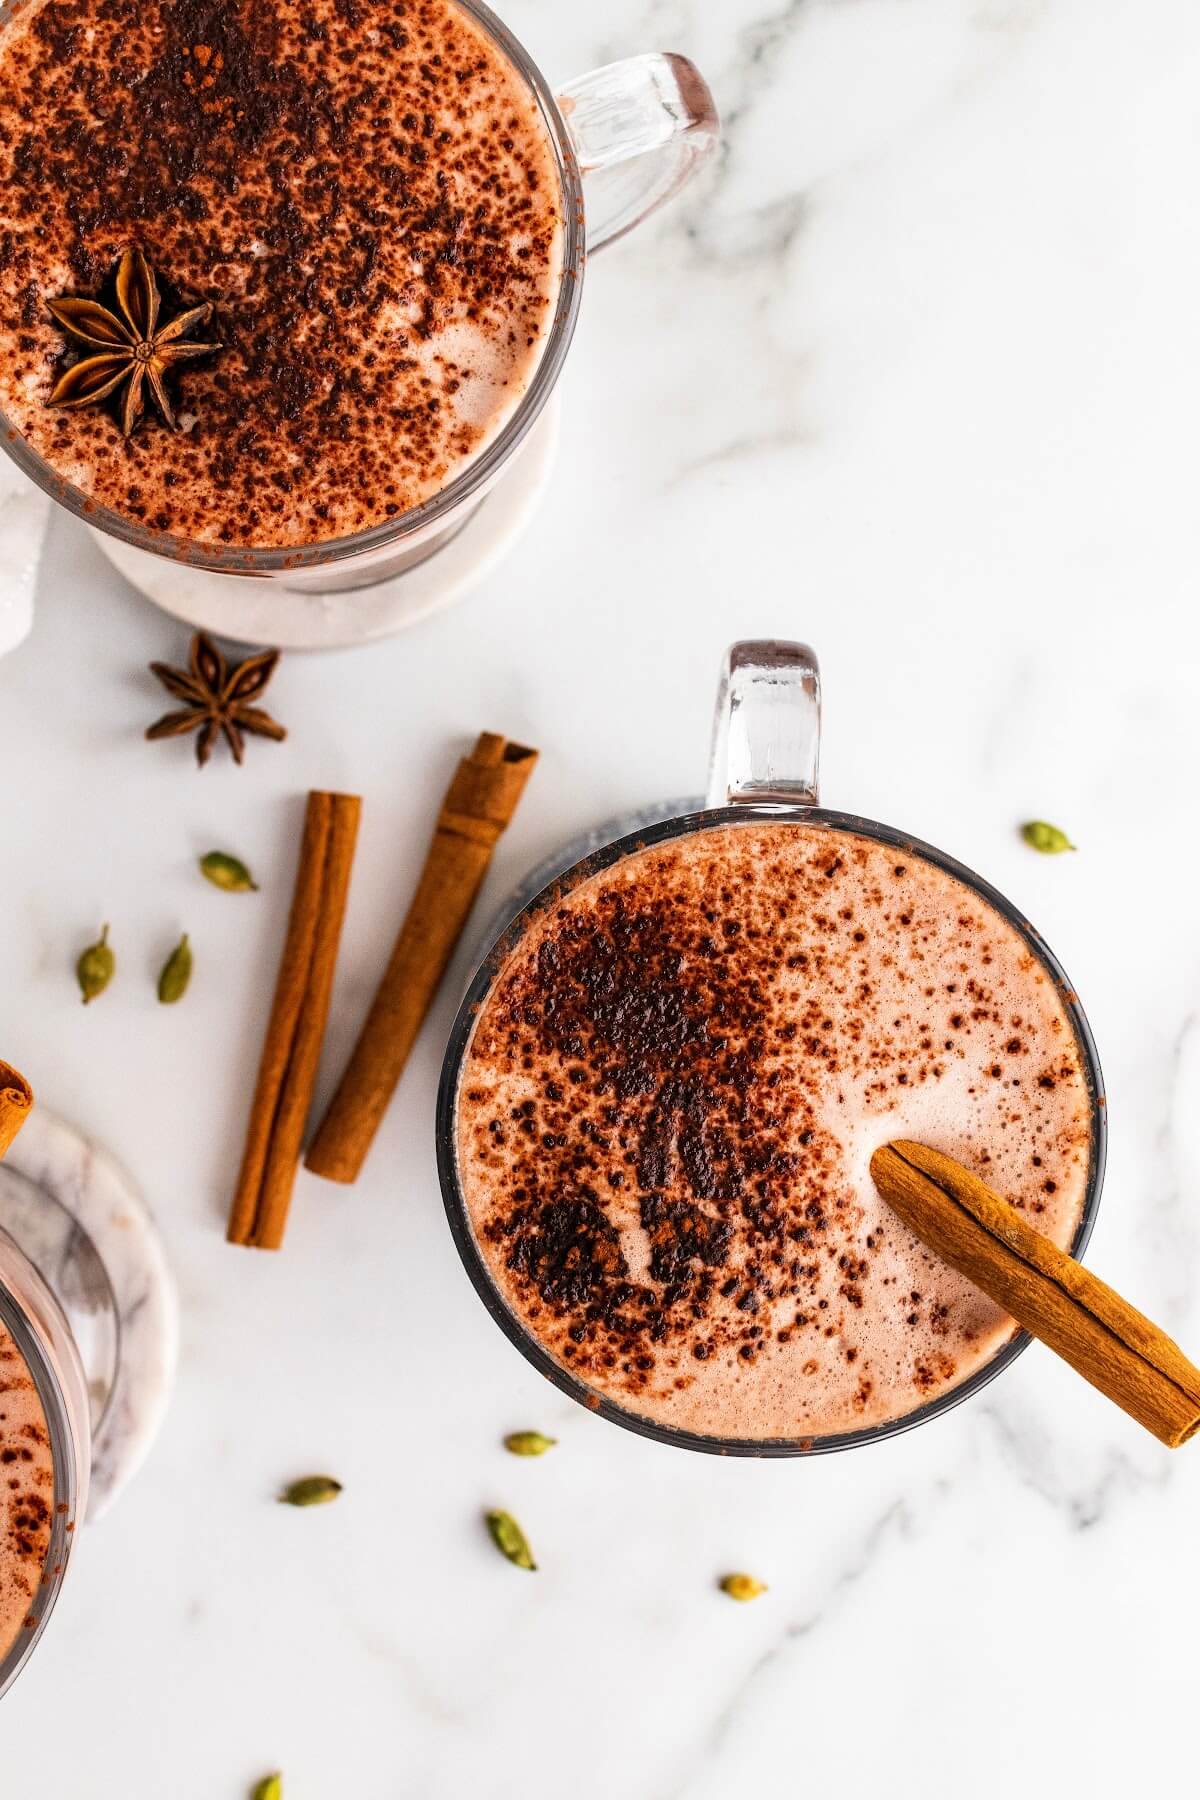 Overhead photo of three glass mugs filled with hot chocolate, one garnished with cinnamon sticks and ground cinnamon and one garnished with ground cinnamon and a star anise pod, sitting on marble coasters with dried star anise pods, cinnamon sticks and cardamom pods sitting around them.